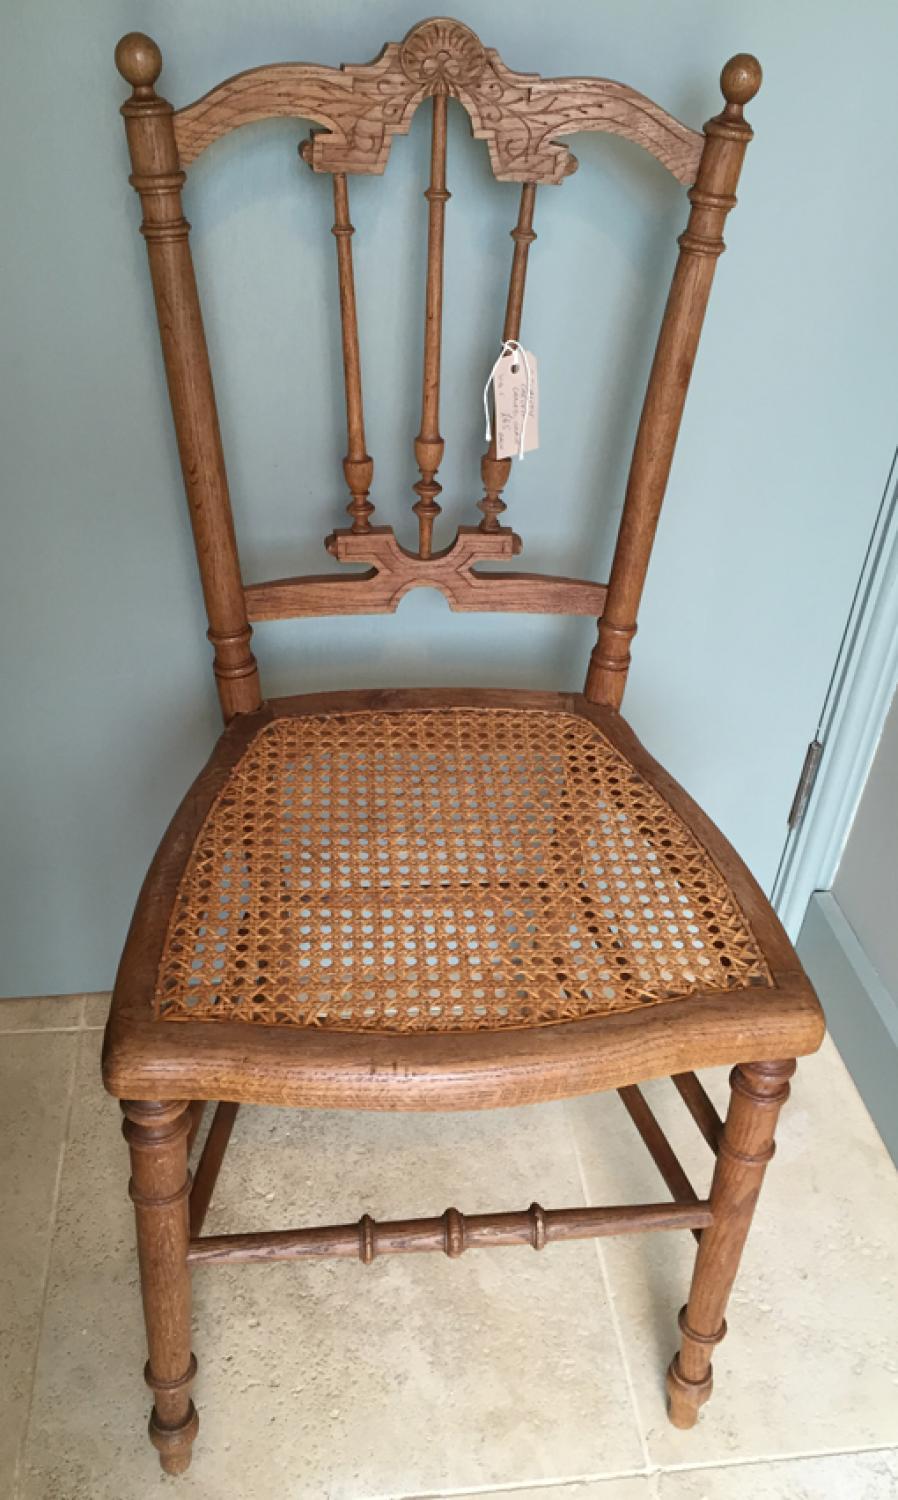 Pretty Spindle Bedroom Chair